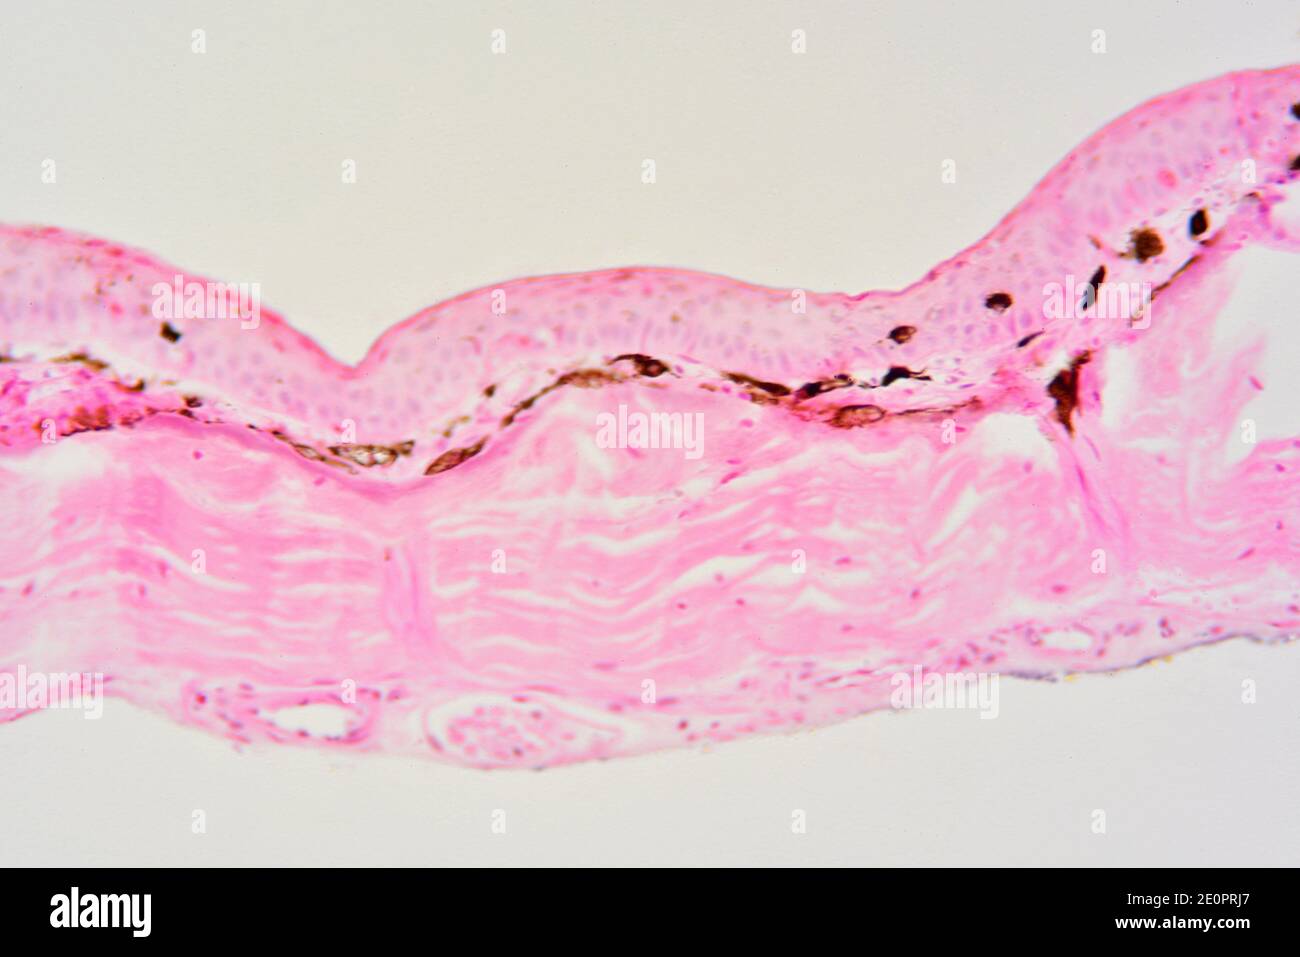 Frog skin showing epidermis, pigmentary layer with melanocytes (brown), blood vessels and dermis. Photomicrograph X150 at 10 cm wide. Stock Photo